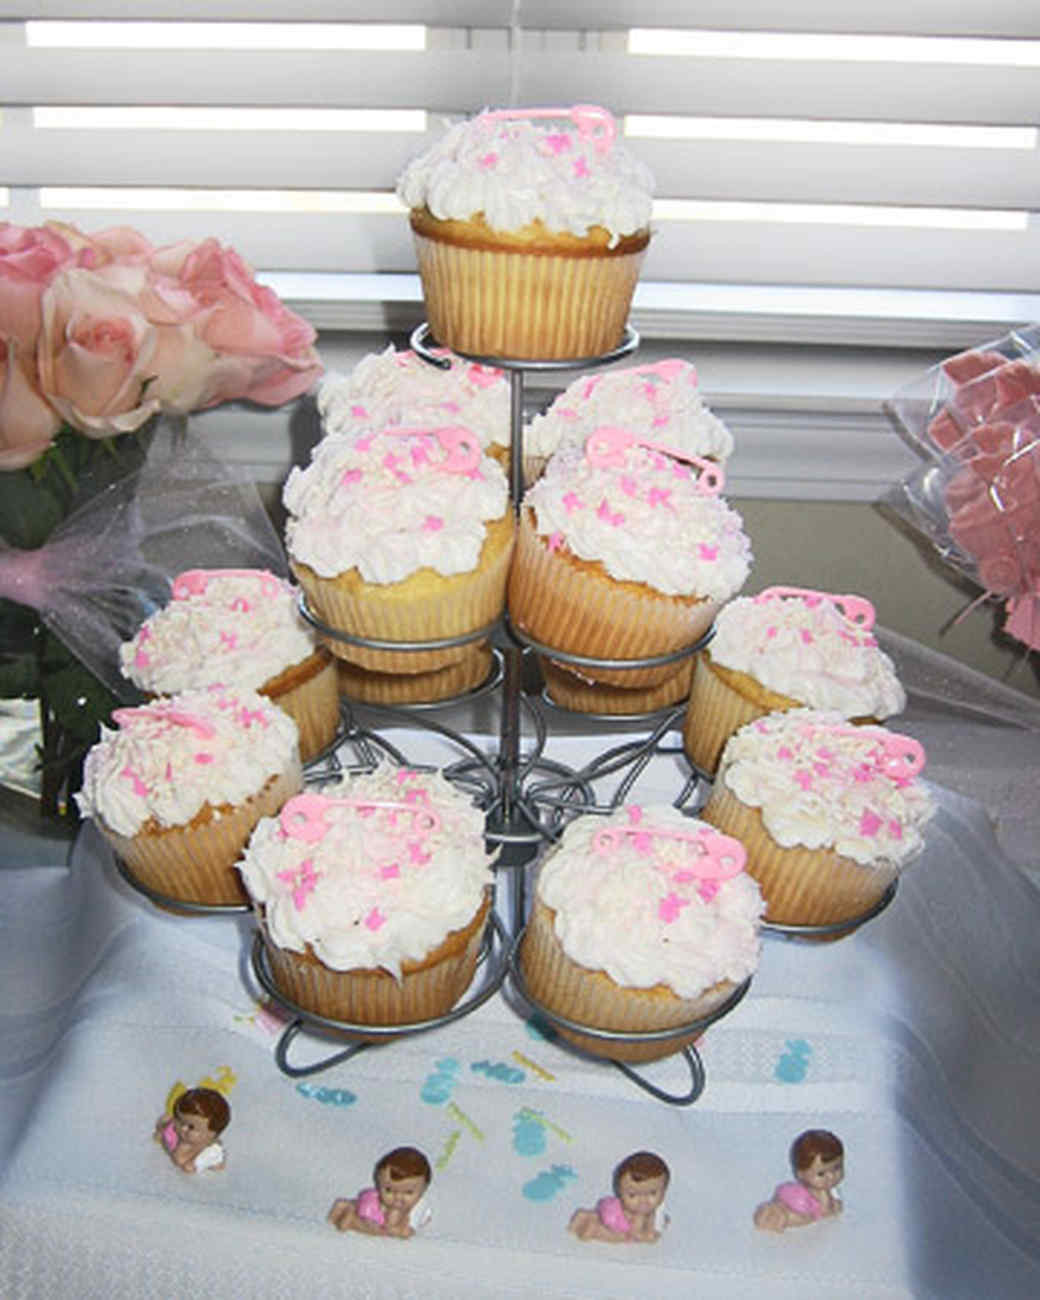 Baby Shower Girl Cupcakes
 Your Best Cupcakes for Baby Showers